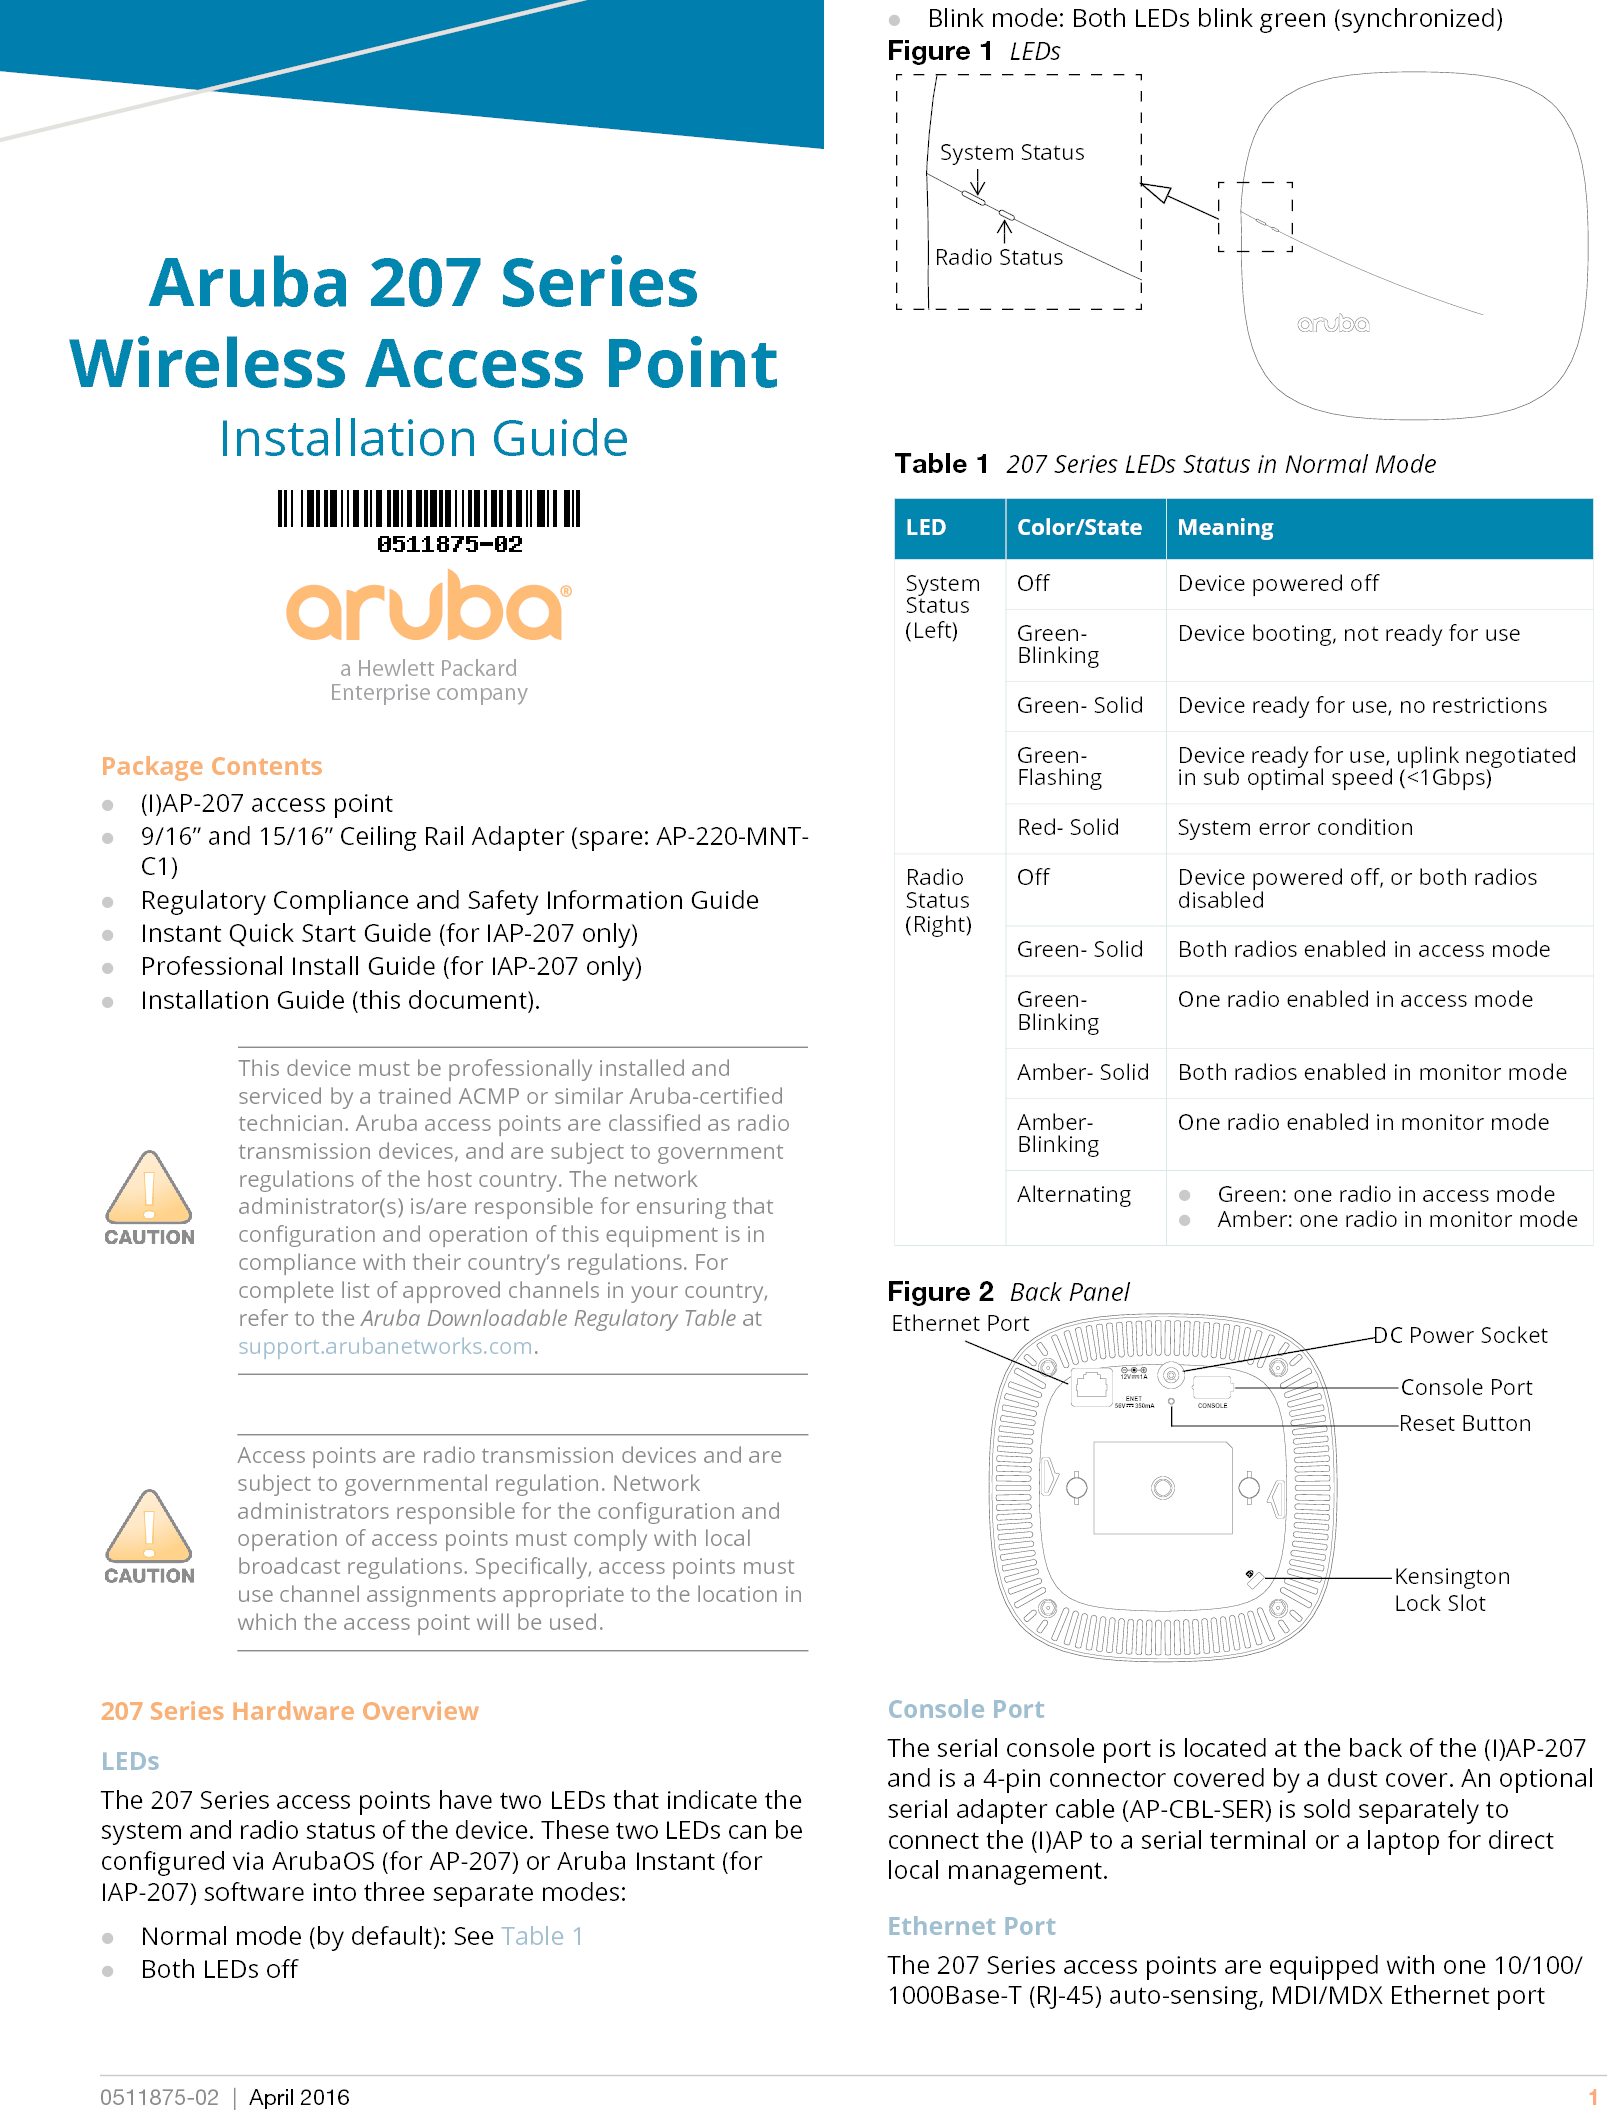 Aruba 207 Series Wireless Access PointInstallation Guide0511875-02 | April 2016 1a Hewlett PackardEnterprise companyPackage Contents(I)AP-207 access point9/16” and 15/16” Ceiling Rail Adapter (spare: AP-220-MNT-C1)Regulatory Compliance and Safety Information GuideInstant Quick Start Guide (for IAP-207 only)Professional Install Guide (for IAP-207 only)Installation Guide (this document).207 Series Hardware OverviewLEDsThe 207 Series access points have two LEDs that indicate the system and radio status of the device. These two LEDs can be configured via ArubaOS (for AP-207) or Aruba Instant (for IAP-207) software into three separate modes:Normal mode (by default): See Table 1Both LEDs offThis device must be professionally installed and serviced by a trained ACMP or similar Aruba-certified technician. Aruba access points are classified as radio transmission devices, and are subject to government regulations of the host country. The network administrator(s) is/are responsible for ensuring that configuration and operation of this equipment is in compliance with their country’s regulations. For complete list of approved channels in your country, refer to the Aruba Downloadable Regulatory Table at support.arubanetworks.com.Access points are radio transmission devices and are subject to governmental regulation. Network administrators responsible for the configuration and operation of access points must comply with local broadcast regulations. Specifically, access points must use channel assignments appropriate to the location in which the access point will be used.Blink mode: Both LEDs blink green (synchronized)Figure 1  LEDsFigure 2  Back PanelConsole PortThe serial console port is located at the back of the (I)AP-207 and is a 4-pin connector covered by a dust cover. An optional serial adapter cable (AP-CBL-SER) is sold separately to connect the (I)AP to a serial terminal or a laptop for direct local management. Ethernet PortThe 207 Series access points are equipped with one 10/100/1000Base-T (RJ-45) auto-sensing, MDI/MDX Ethernet port Table 1  207 Series LEDs Status in Normal ModeLED Color/State MeaningSystem Status(Left)Off Device powered offGreen- Blinking Device booting, not ready for useGreen- Solid Device ready for use, no restrictionsGreen- Flashing Device ready for use, uplink negotiated in sub optimal speed (&lt;1Gbps)Red- Solid System error conditionRadio Status(Right)Off Device powered off, or both radios disabledGreen- Solid Both radios enabled in access modeGreen- Blinking One radio enabled in access modeAmber- Solid Both radios enabled in monitor modeAmber- Blinking One radio enabled in monitor modeAlternating Green: one radio in access modeAmber: one radio in monitor modeSystem StatusRadio StatusCONSOLEENET12V 1A350mA56VConsole PortEthernet Port DC Power SocketReset ButtonKensington Lock Slot